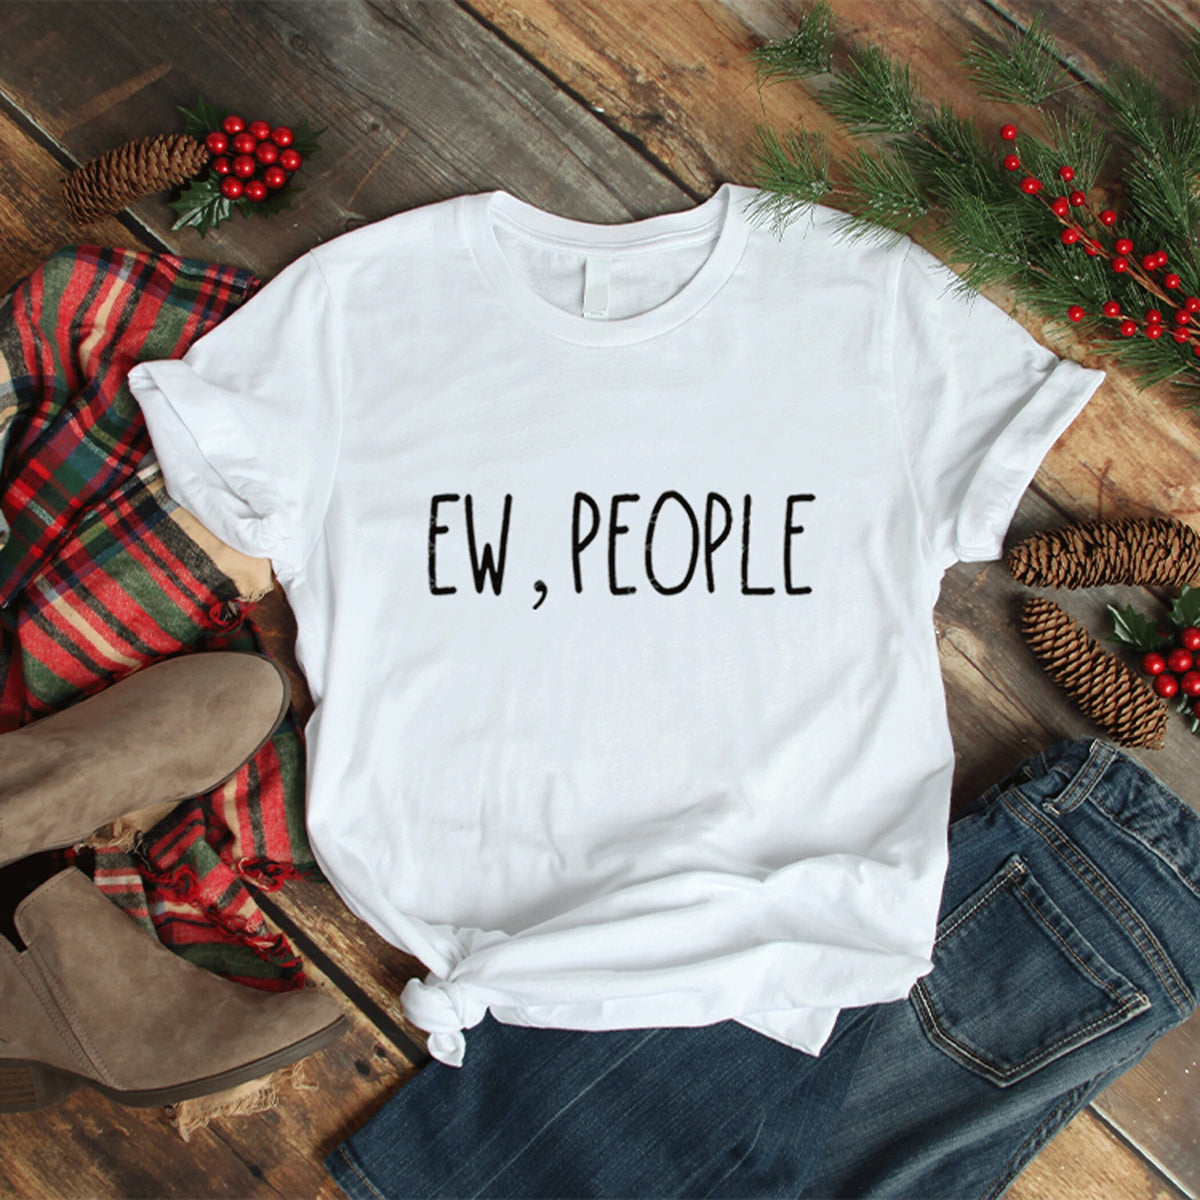 Ew People T-Shirt Tee, Hipster T-Shirts, Hipster Clothing, Hipster Shirt, Funny T-Shirts, Sarcasm T-Shirt, Introvert T-Shirt, funny T-shirts